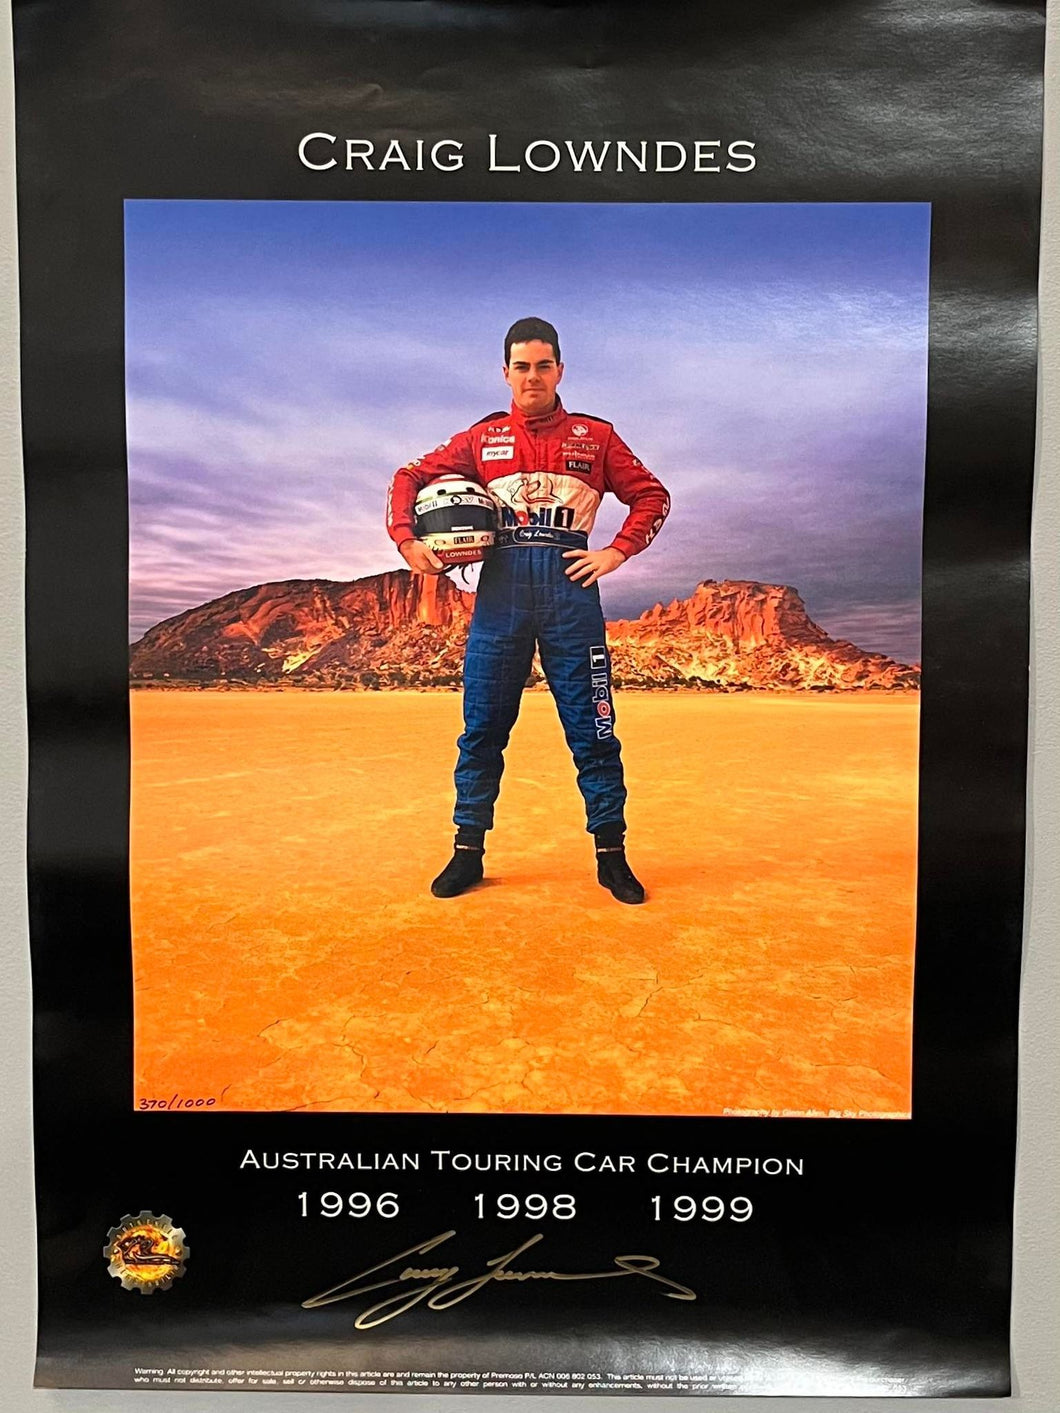 Craig Lowndes ATCC Hand Signed Poster - Limited Edition 370/1000